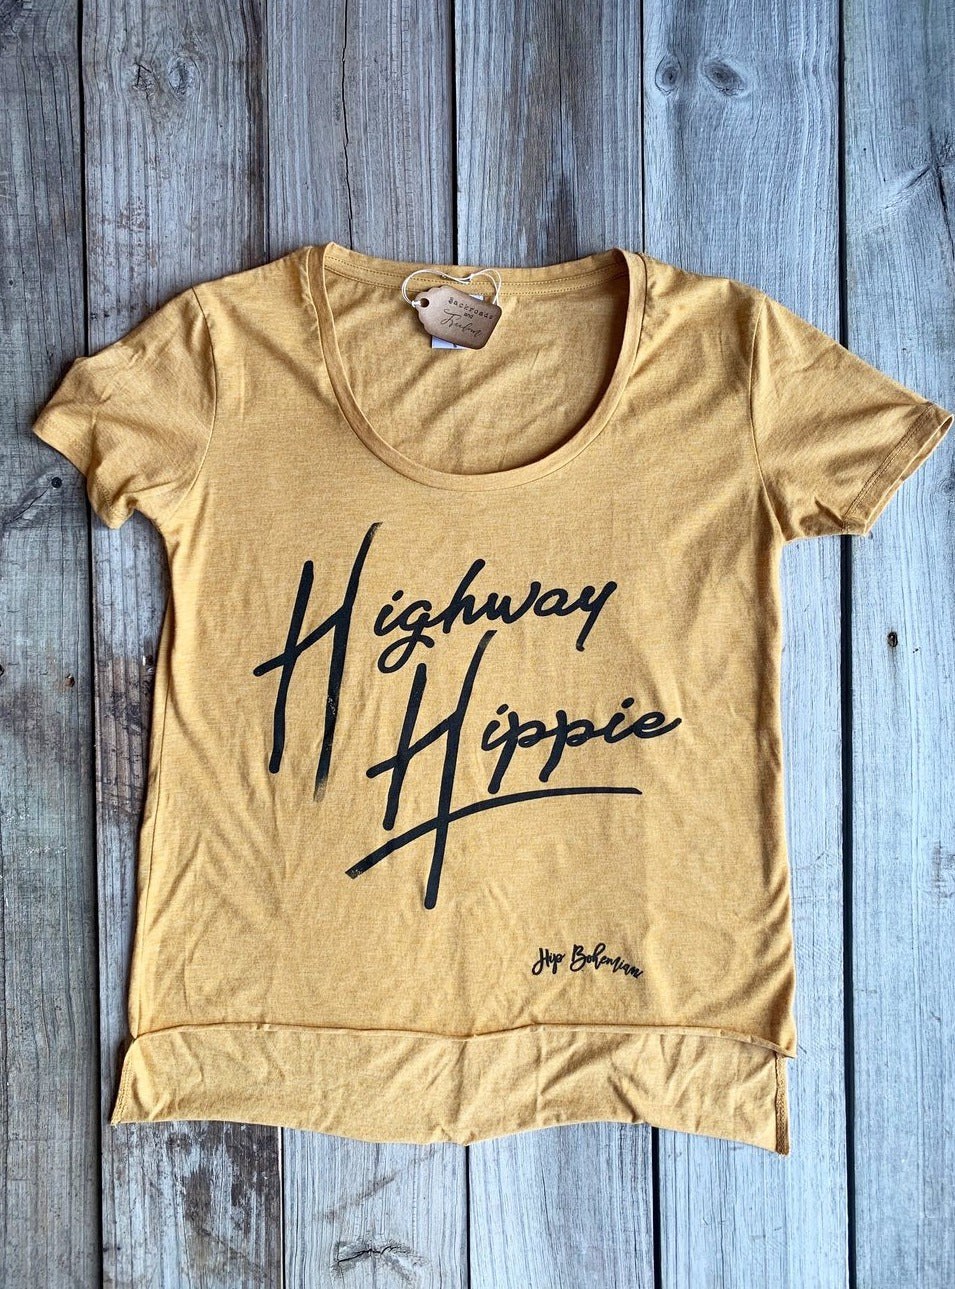 The High-Low Highway Hippie Shirt